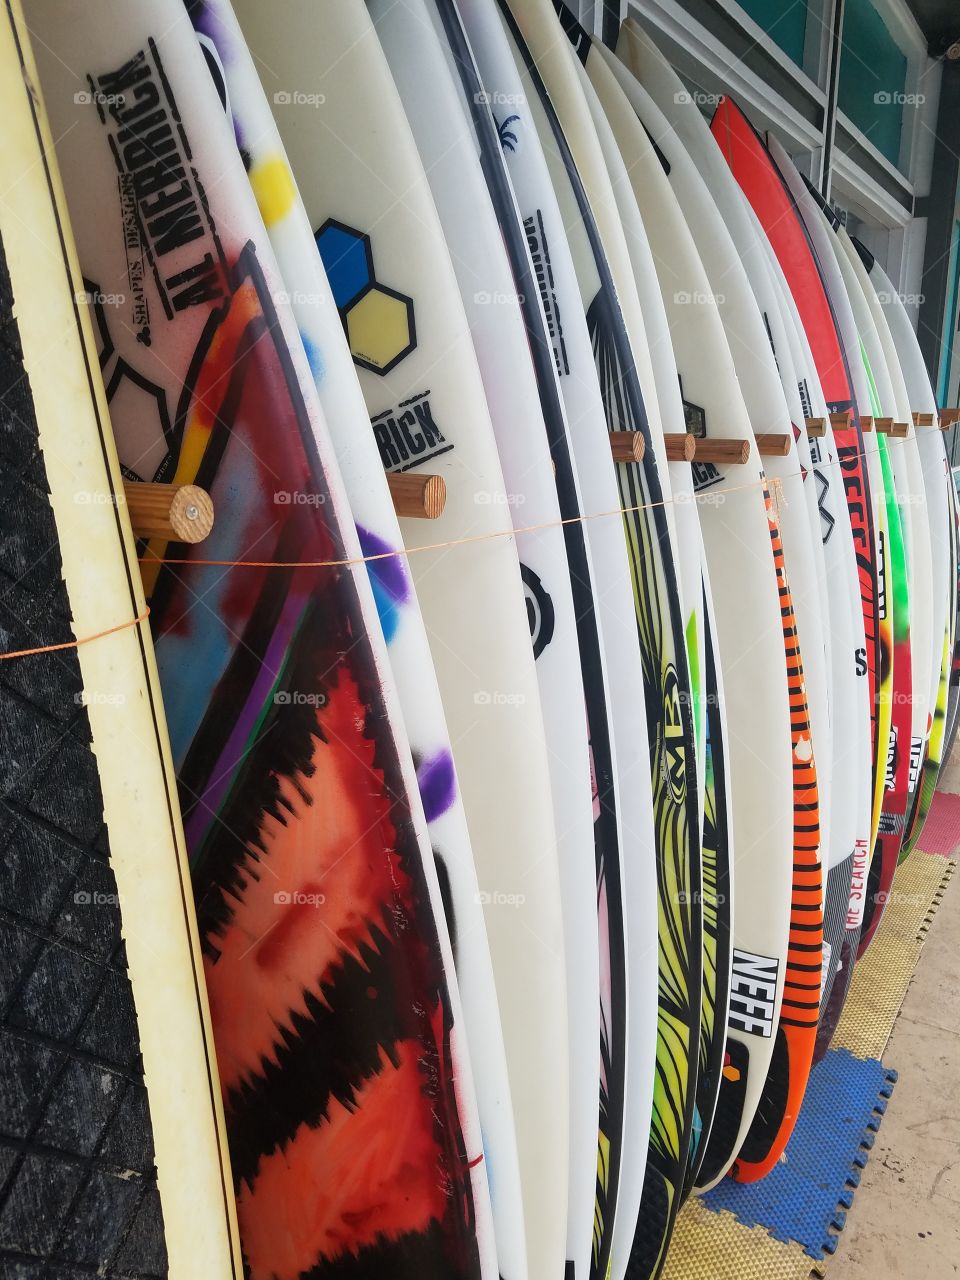 Surf boards line this store front in Haleiwa, HI.